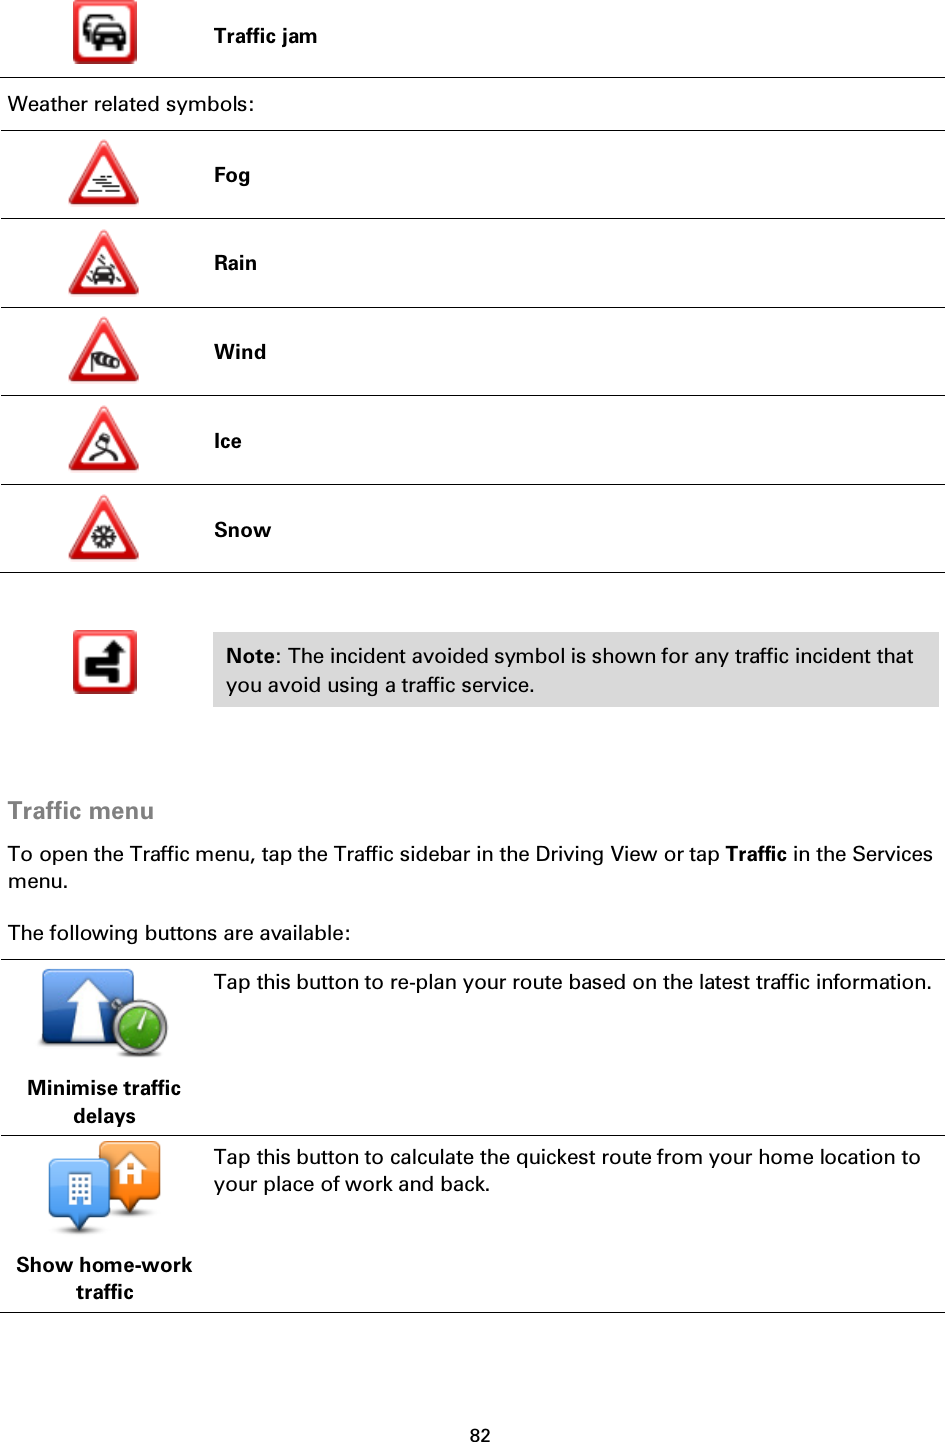 82     Traffic jam Weather related symbols:  Fog  Rain  Wind  Ice  Snow   Note: The incident avoided symbol is shown for any traffic incident that you avoid using a traffic service.   Traffic menu To open the Traffic menu, tap the Traffic sidebar in the Driving View or tap Traffic in the Services menu. The following buttons are available:  Minimise traffic delays Tap this button to re-plan your route based on the latest traffic information.  Show home-work traffic Tap this button to calculate the quickest route from your home location to your place of work and back. 